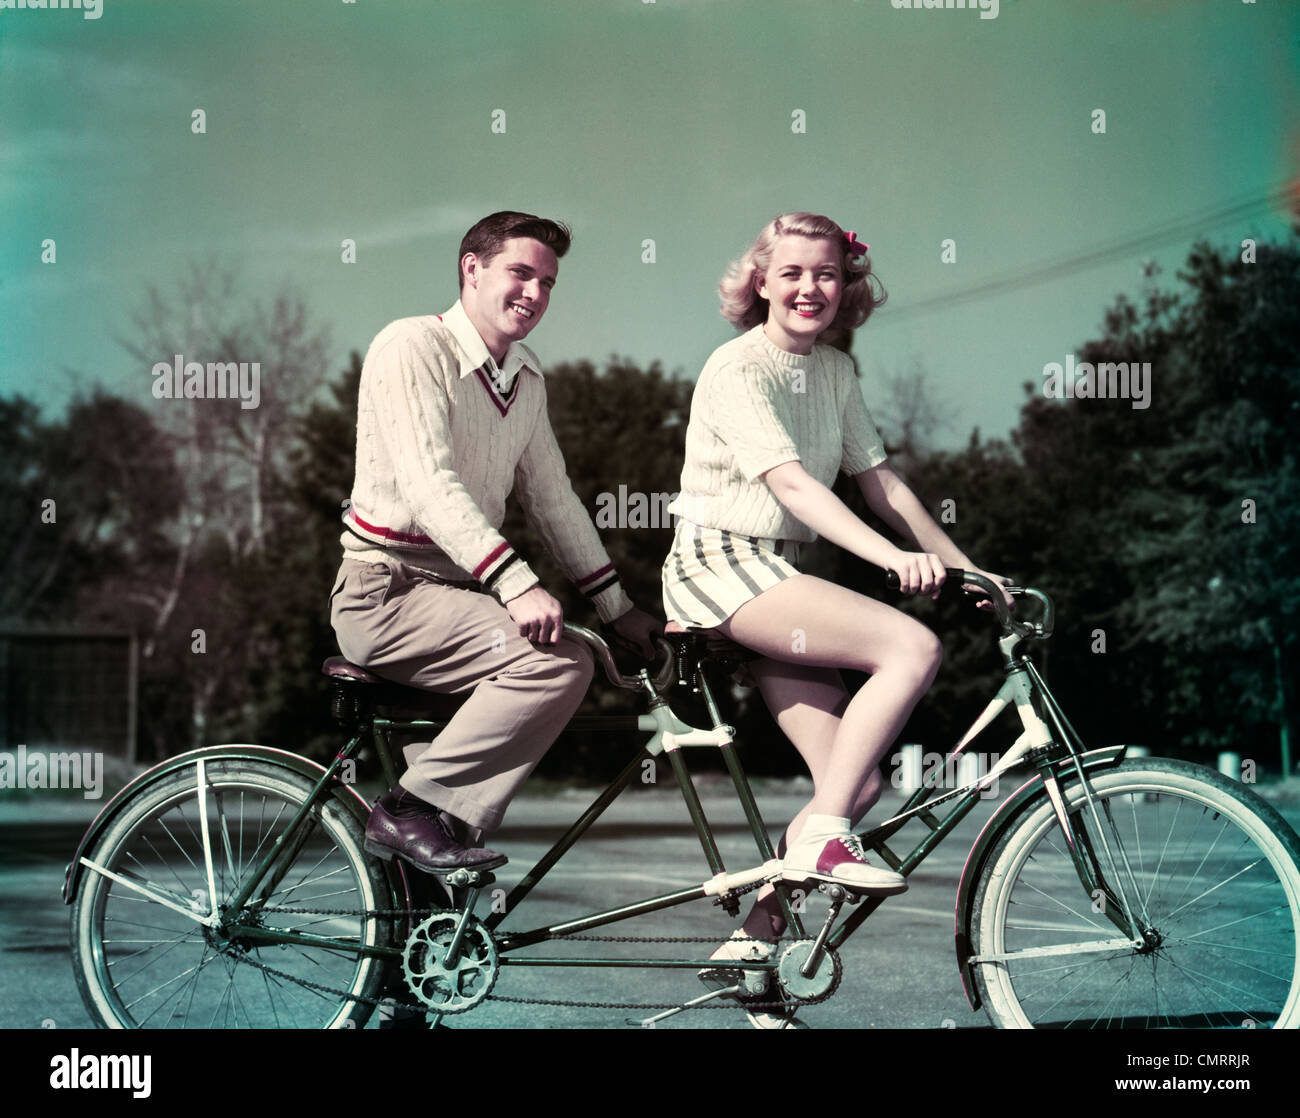 1950s SMILING  COUPLE RIDING TANDEM BICYCLE BUILT FOR TWO Stock Photo